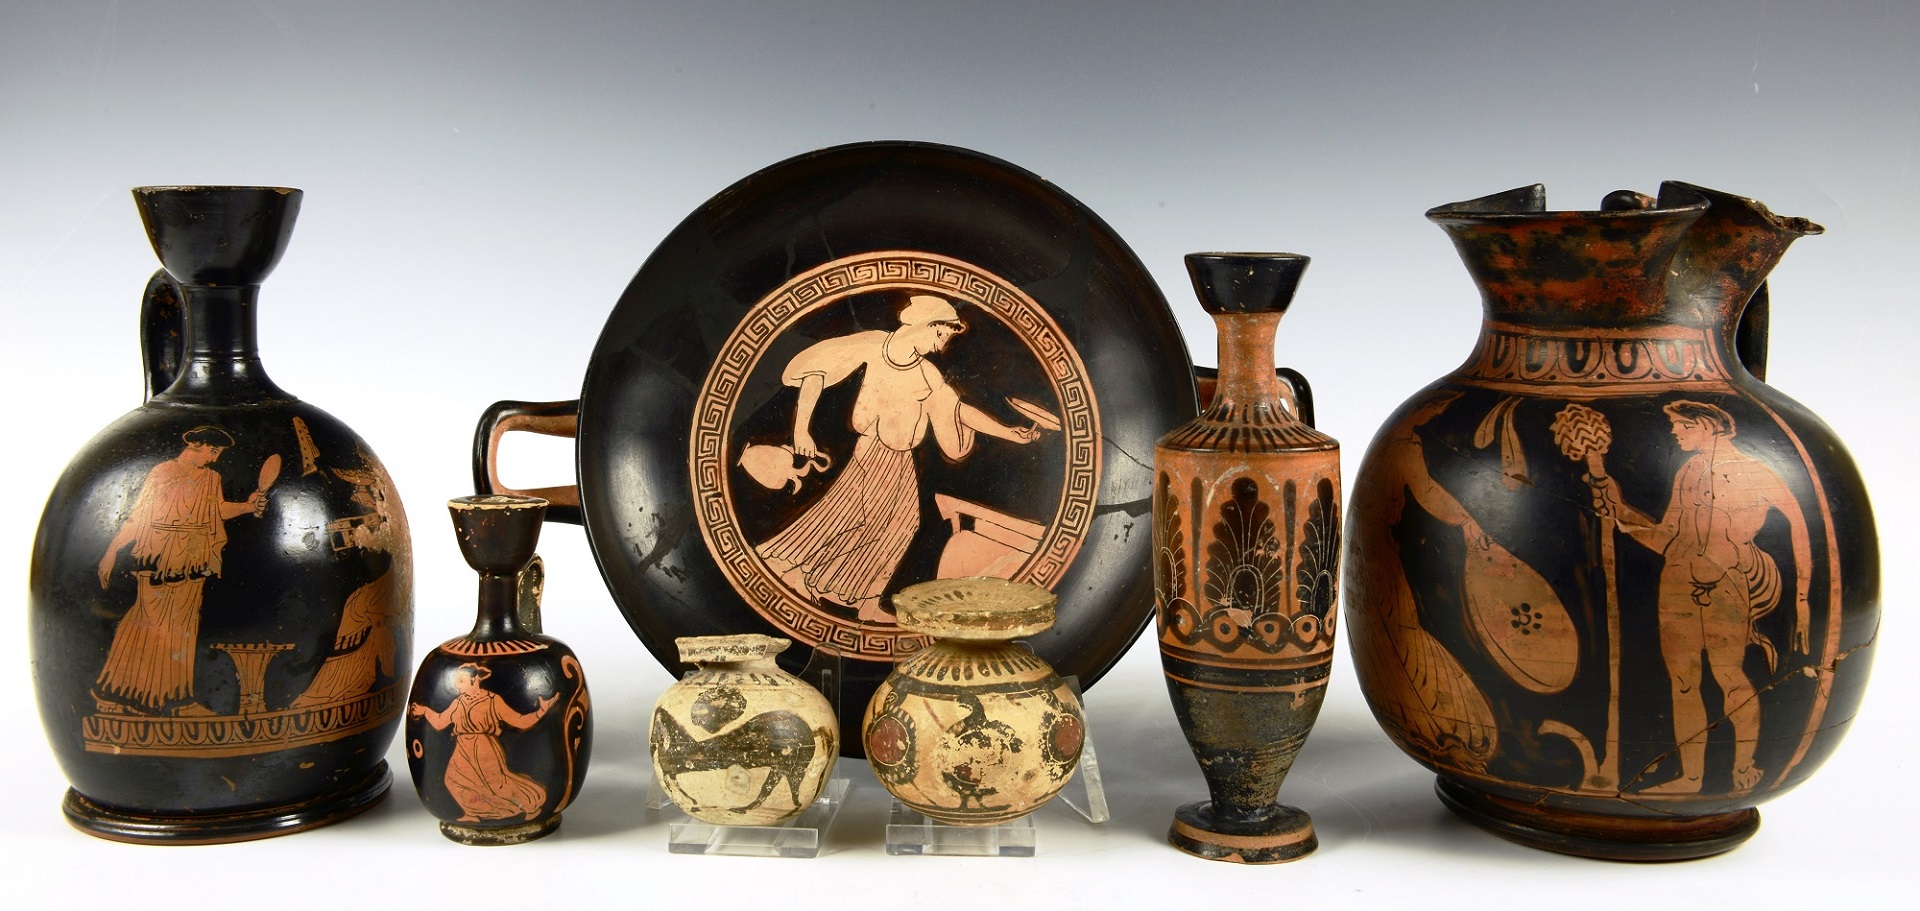 Seven pieces of Ancient Greek ceramics, on a graduated background. Ceramics include a wine cup, oil containers, and ointment pots.